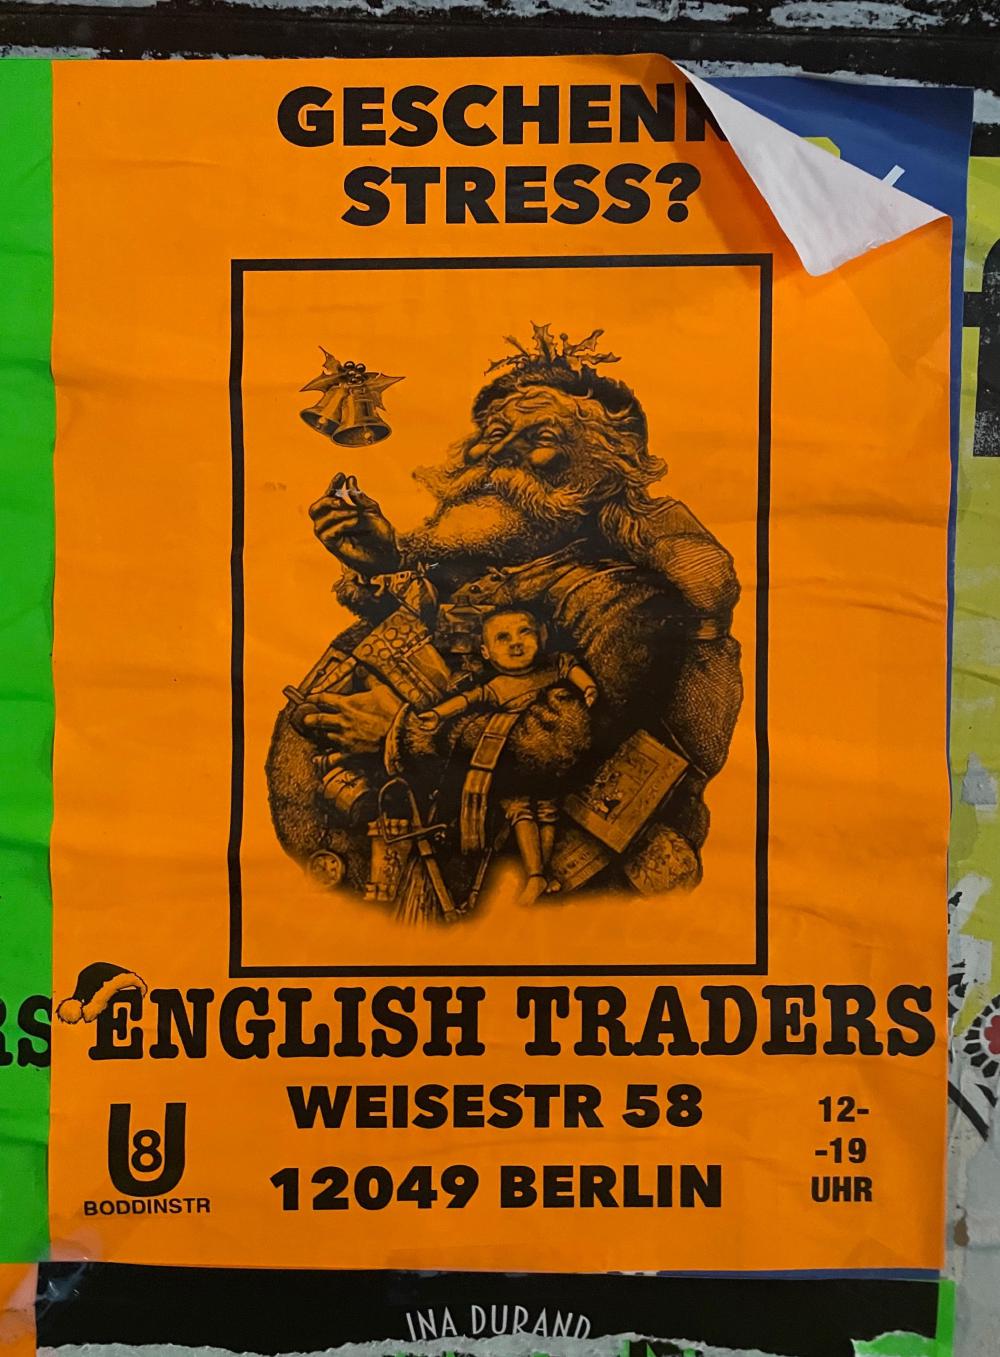 Orange poster for English Traders featuring old illustration of Santa Claus